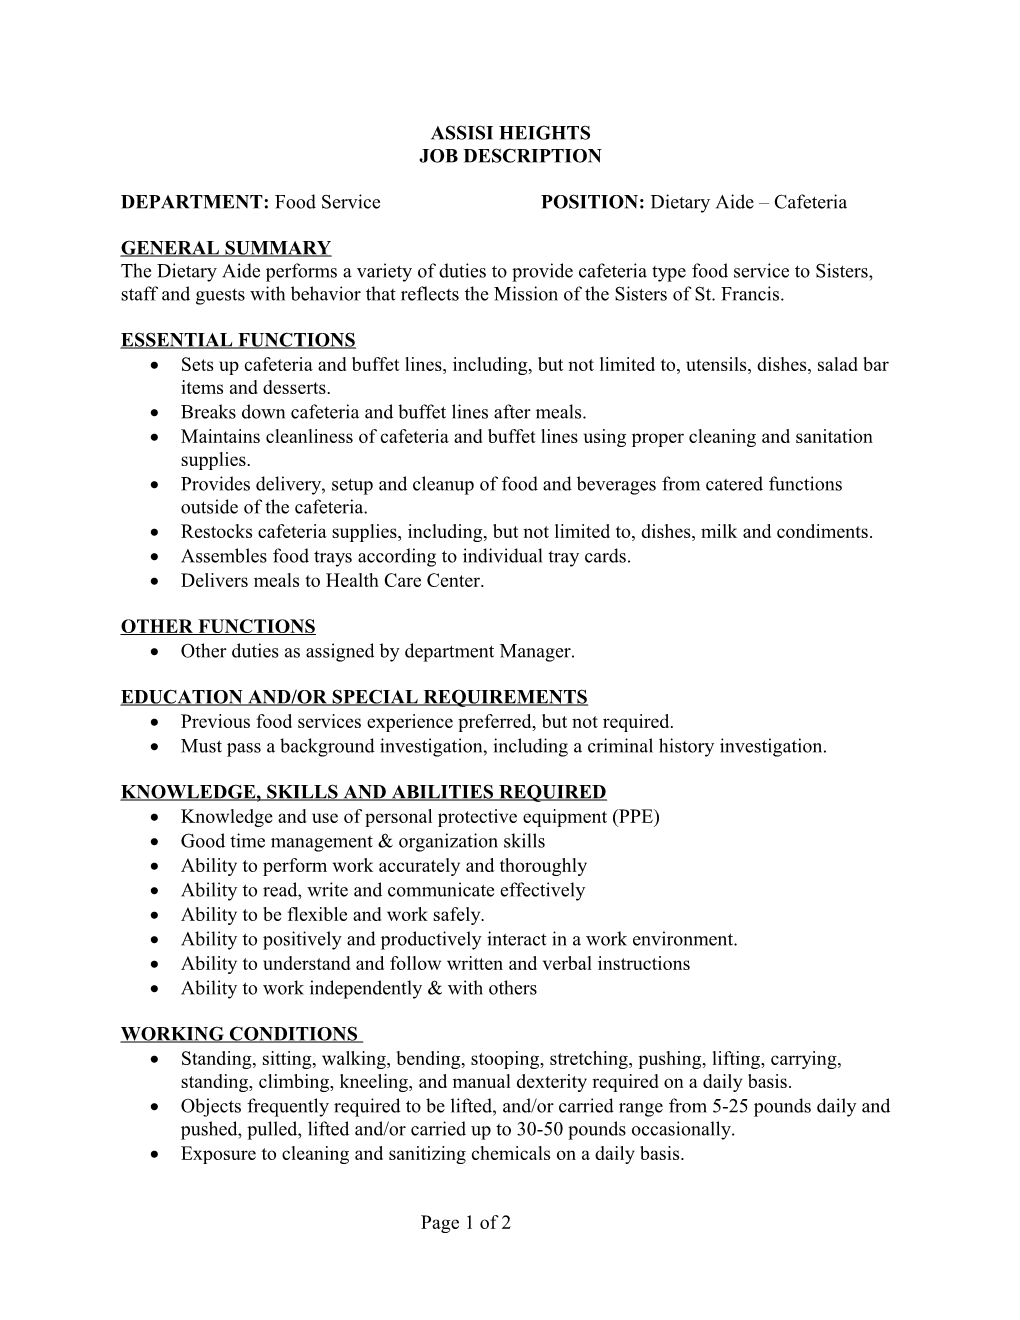 DEPARTMENT:Food Serviceposition: Dietary Aide Cafeteria